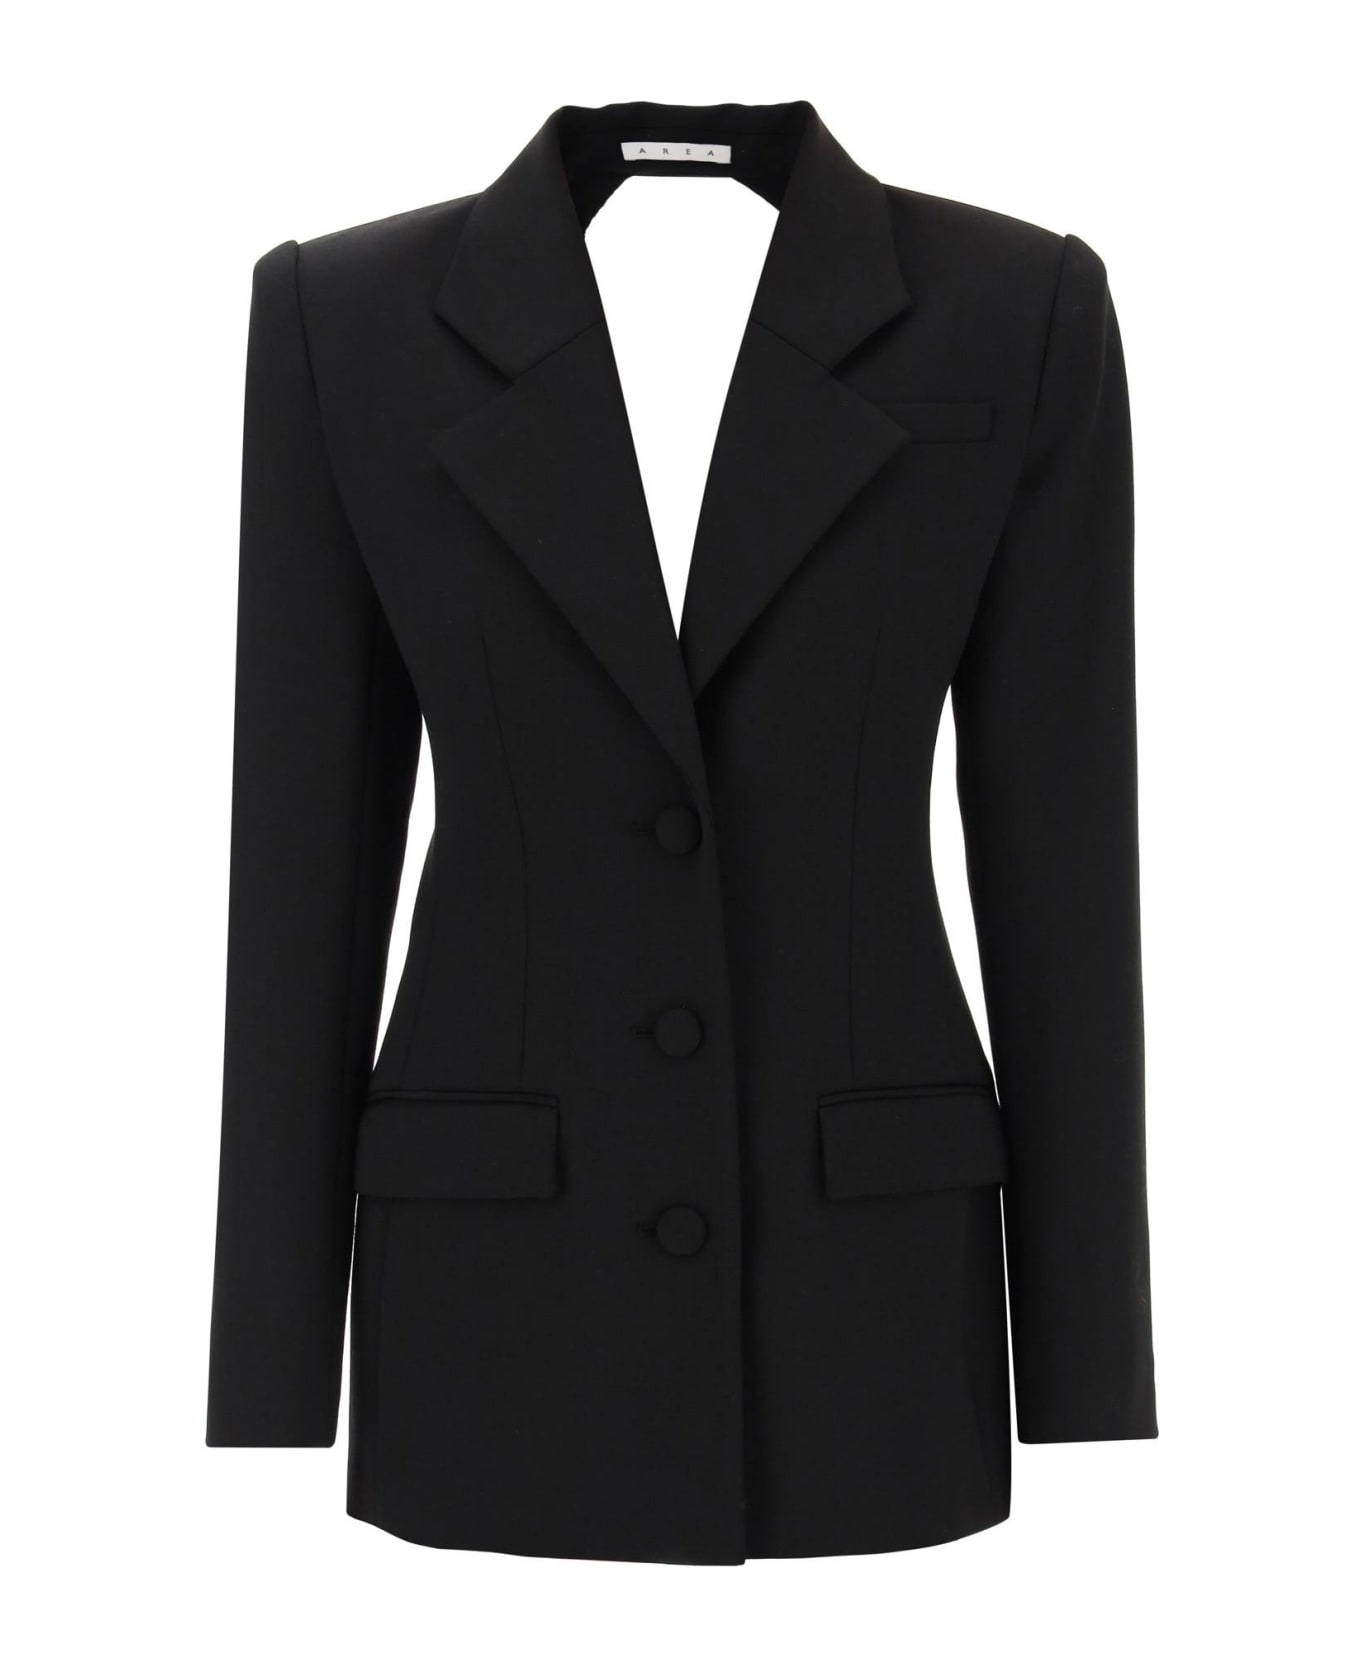 AREA Blazer Dress With Cut-out And Crystals - BLACK (Black) ブレザー